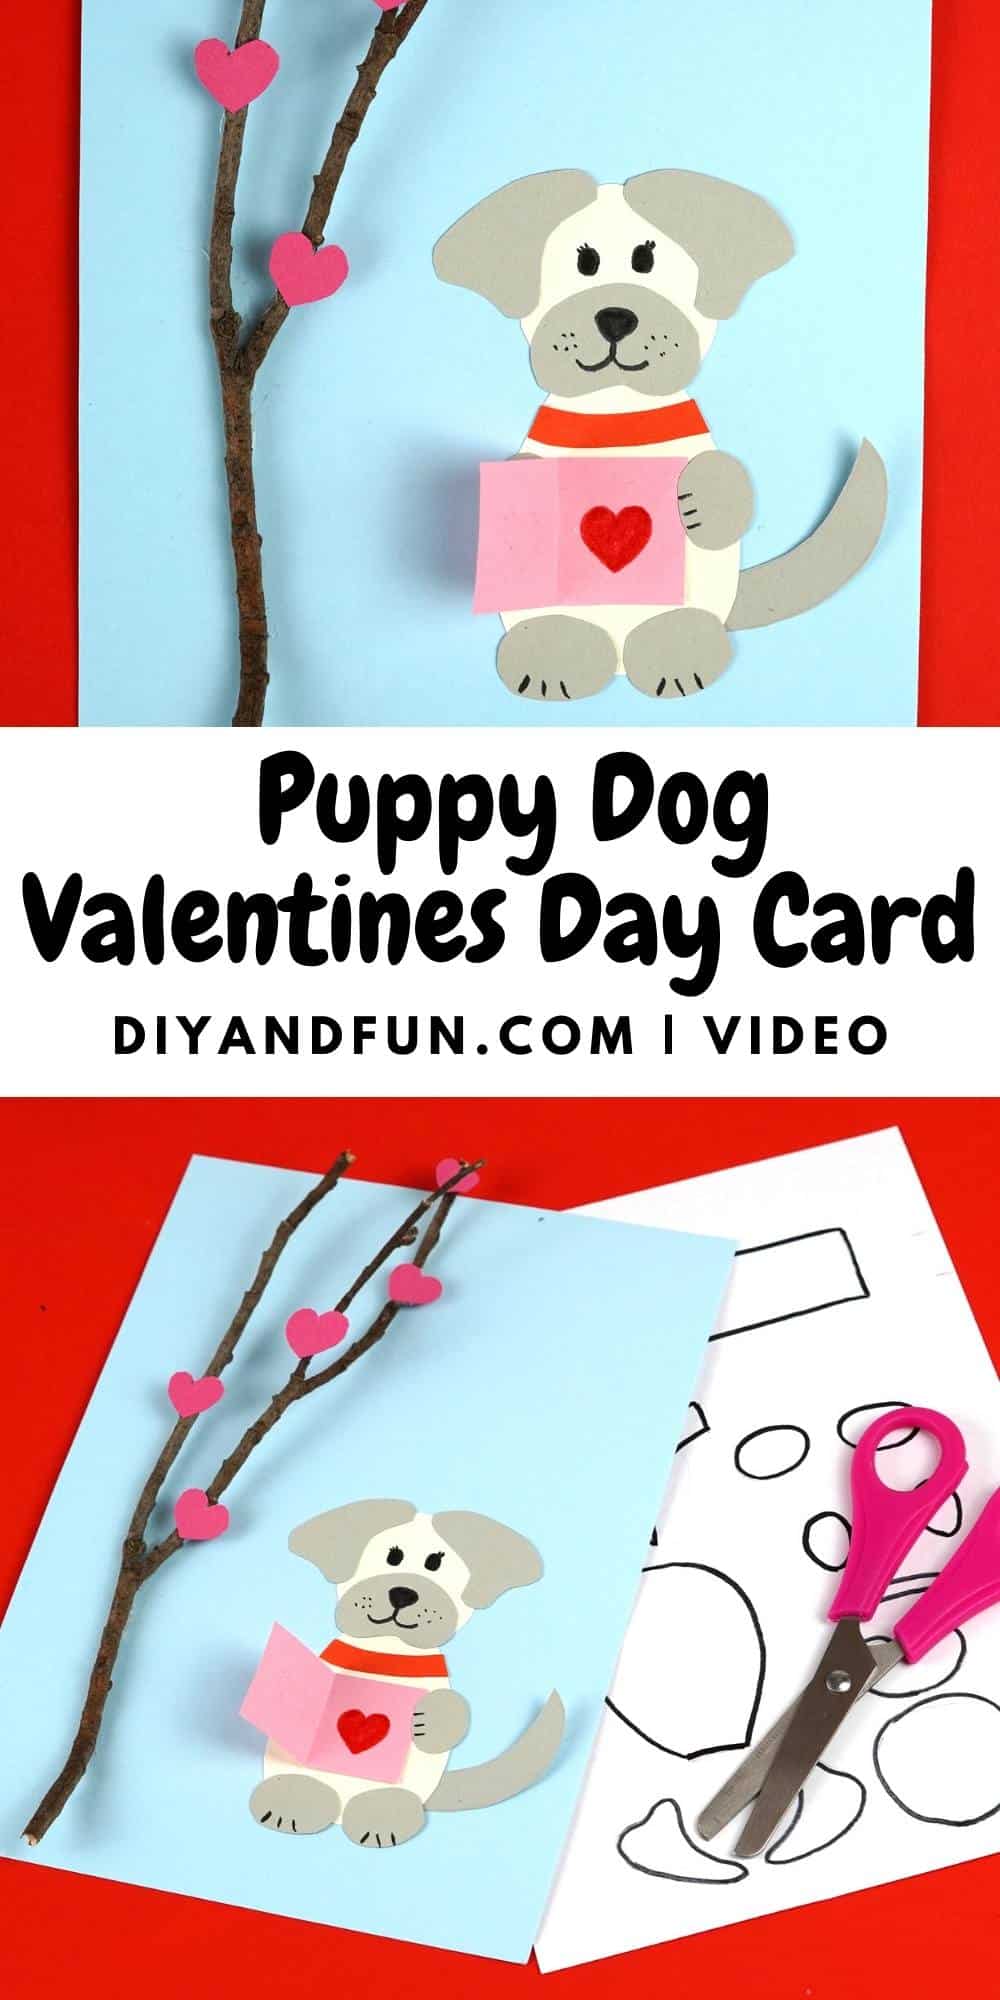 Puppy Dog Valentines Day Card DIY, a simple craft idea for making an adorable homemade card. Video and template.